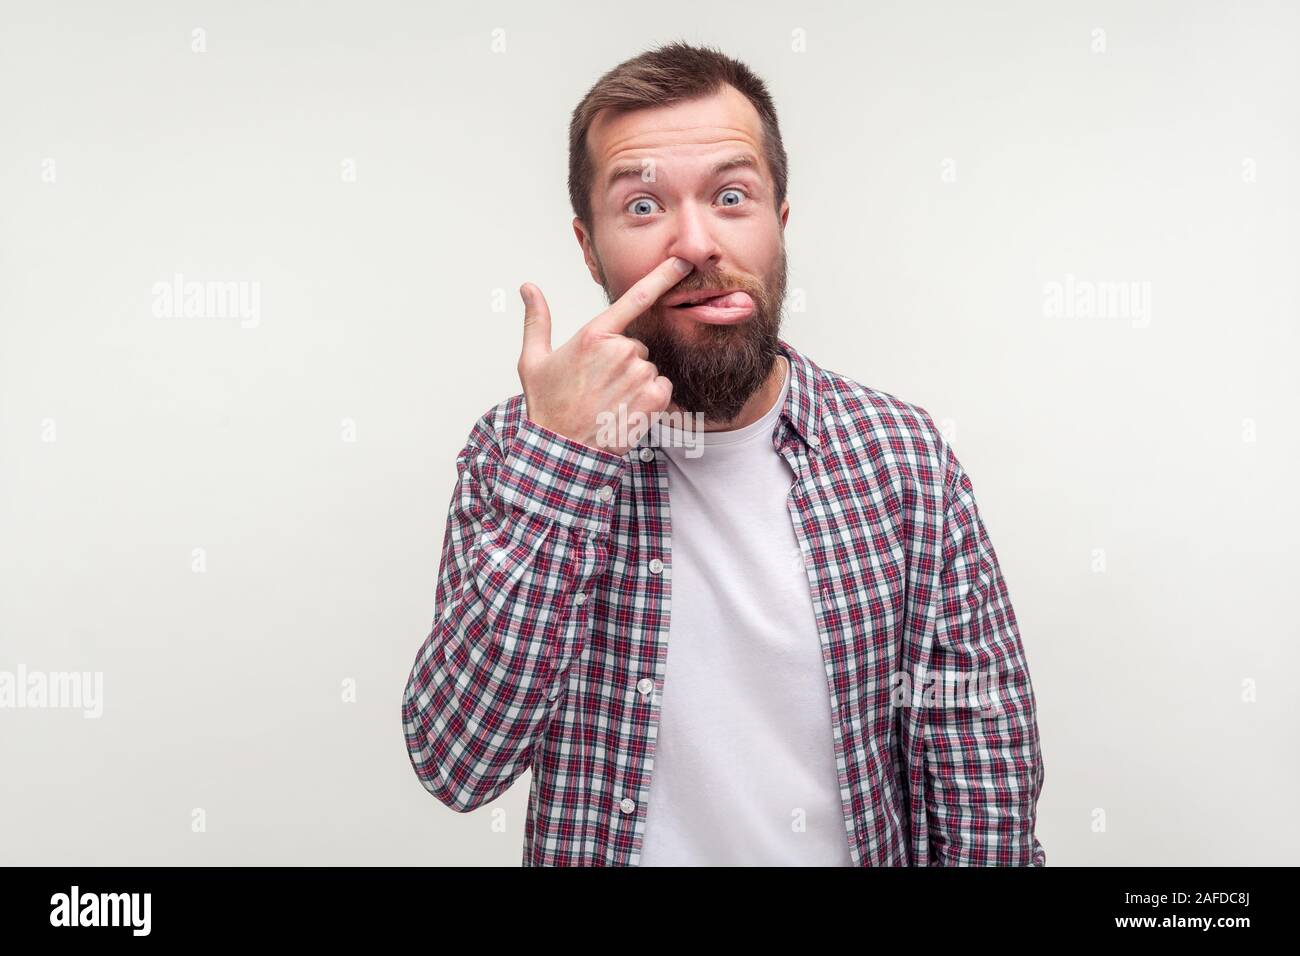 Portrait of funny silly bearded man in casual plaid shirt picking nose and showing tongue with comical stupid face, adult with bad manners, misconduct Stock Photo